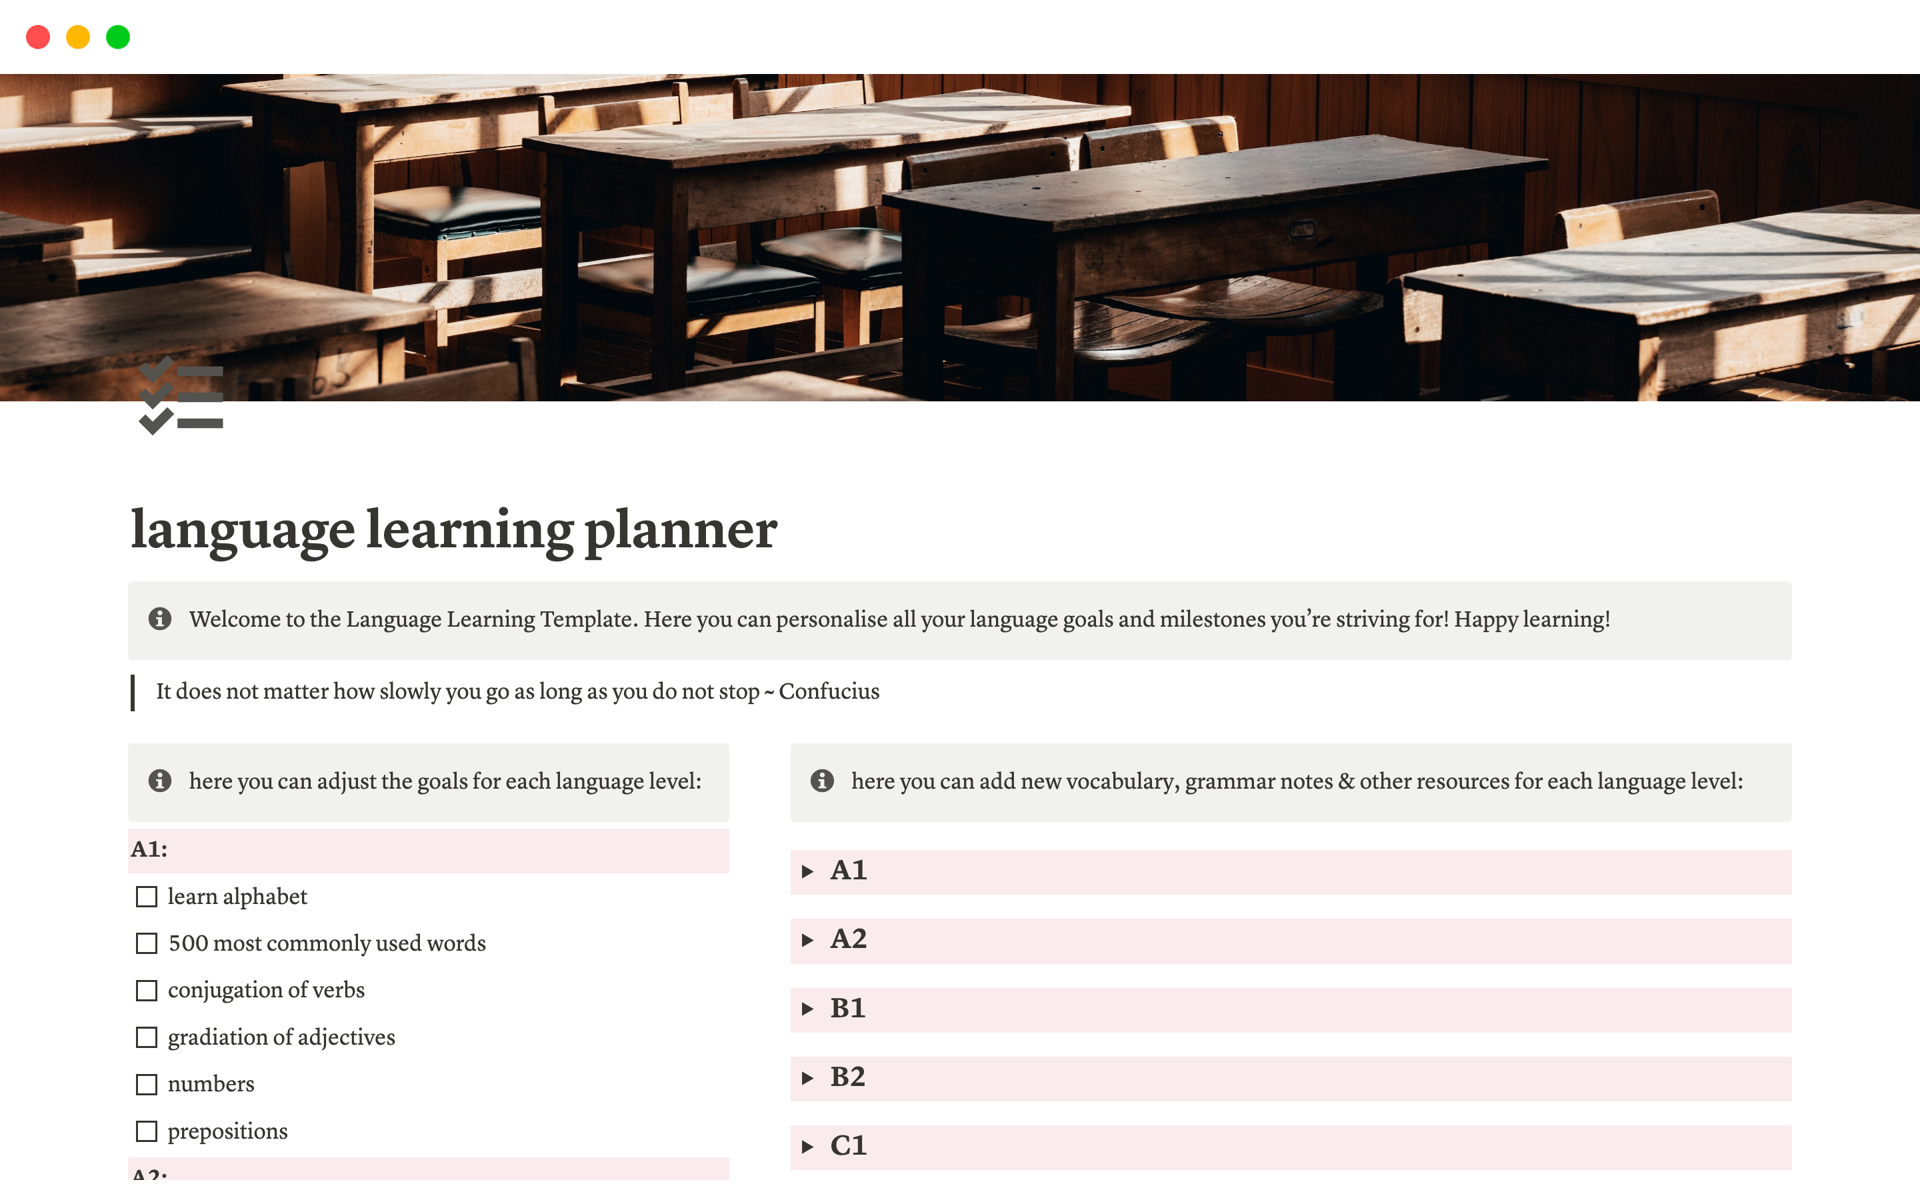 This Notion template provides segmented language learning sections for every proficiency level, accelerating your journey to fluency.